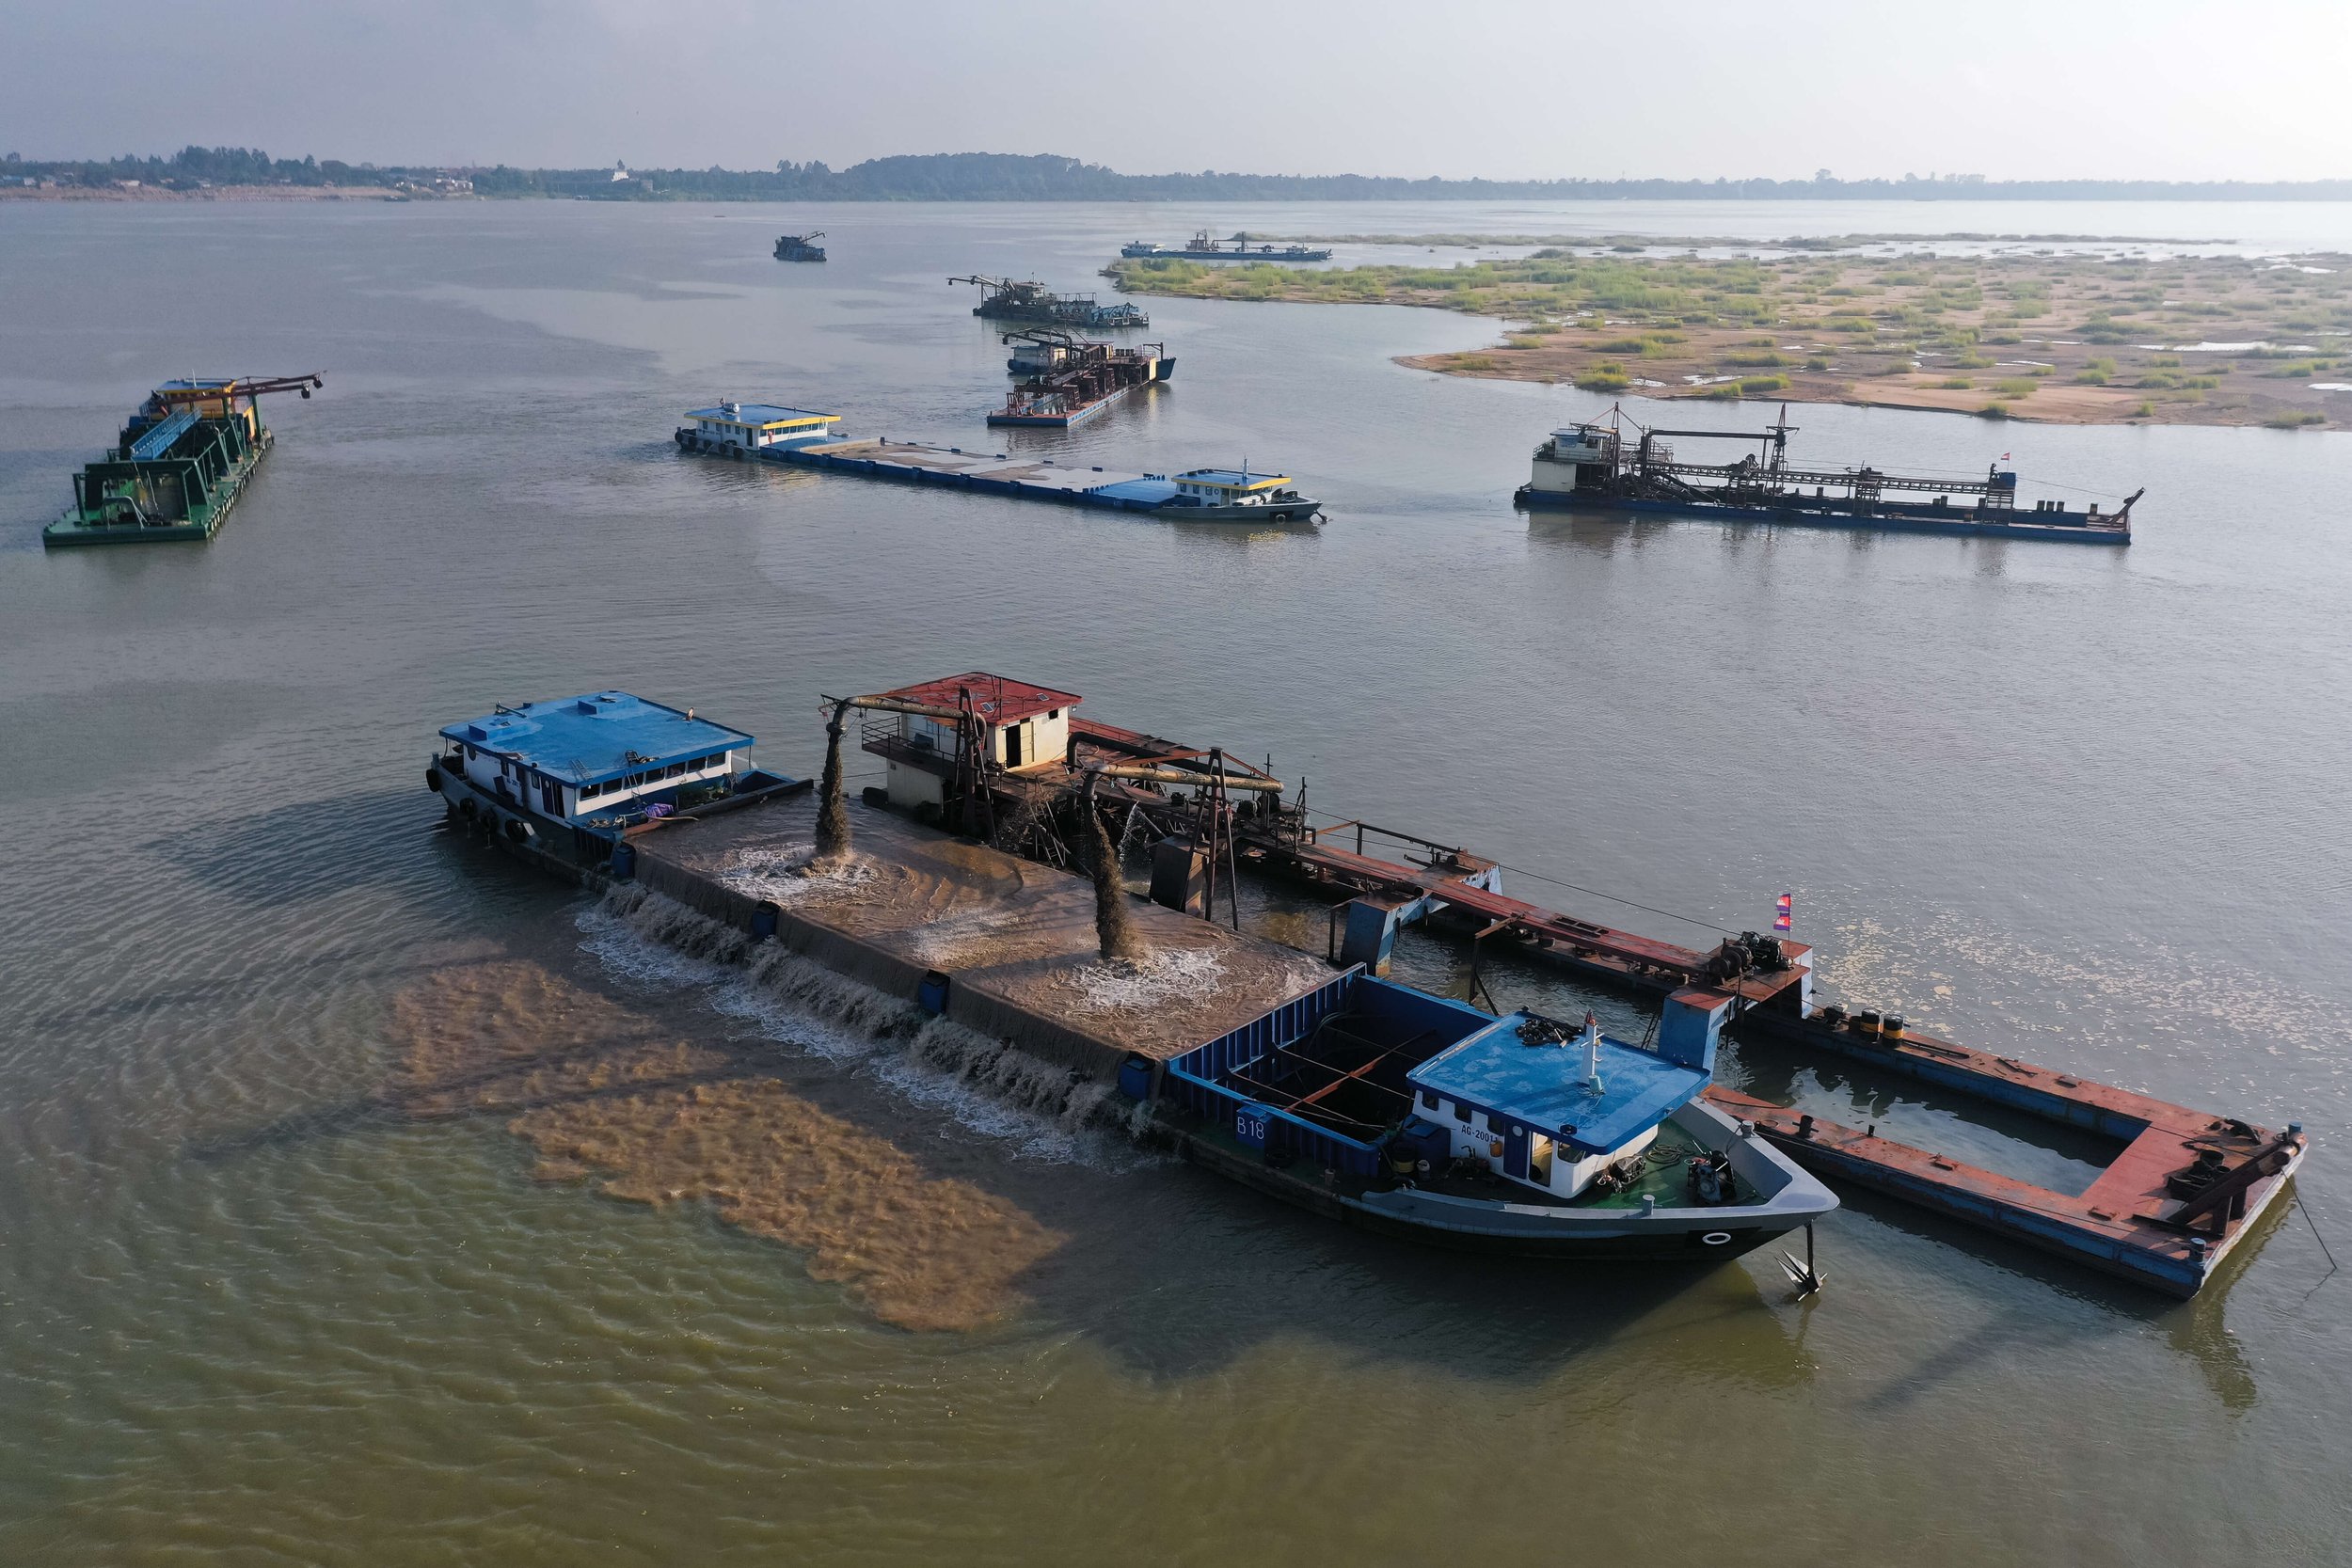  Sand mining barges extract sand in Rokar Koang Commune. Along with being one of the most heavily mined stretches of the Mekong in Cambodia, it was also the site of two riverbank collapses in 2021. The mined sand is shipped to the capital Phnom Penh 